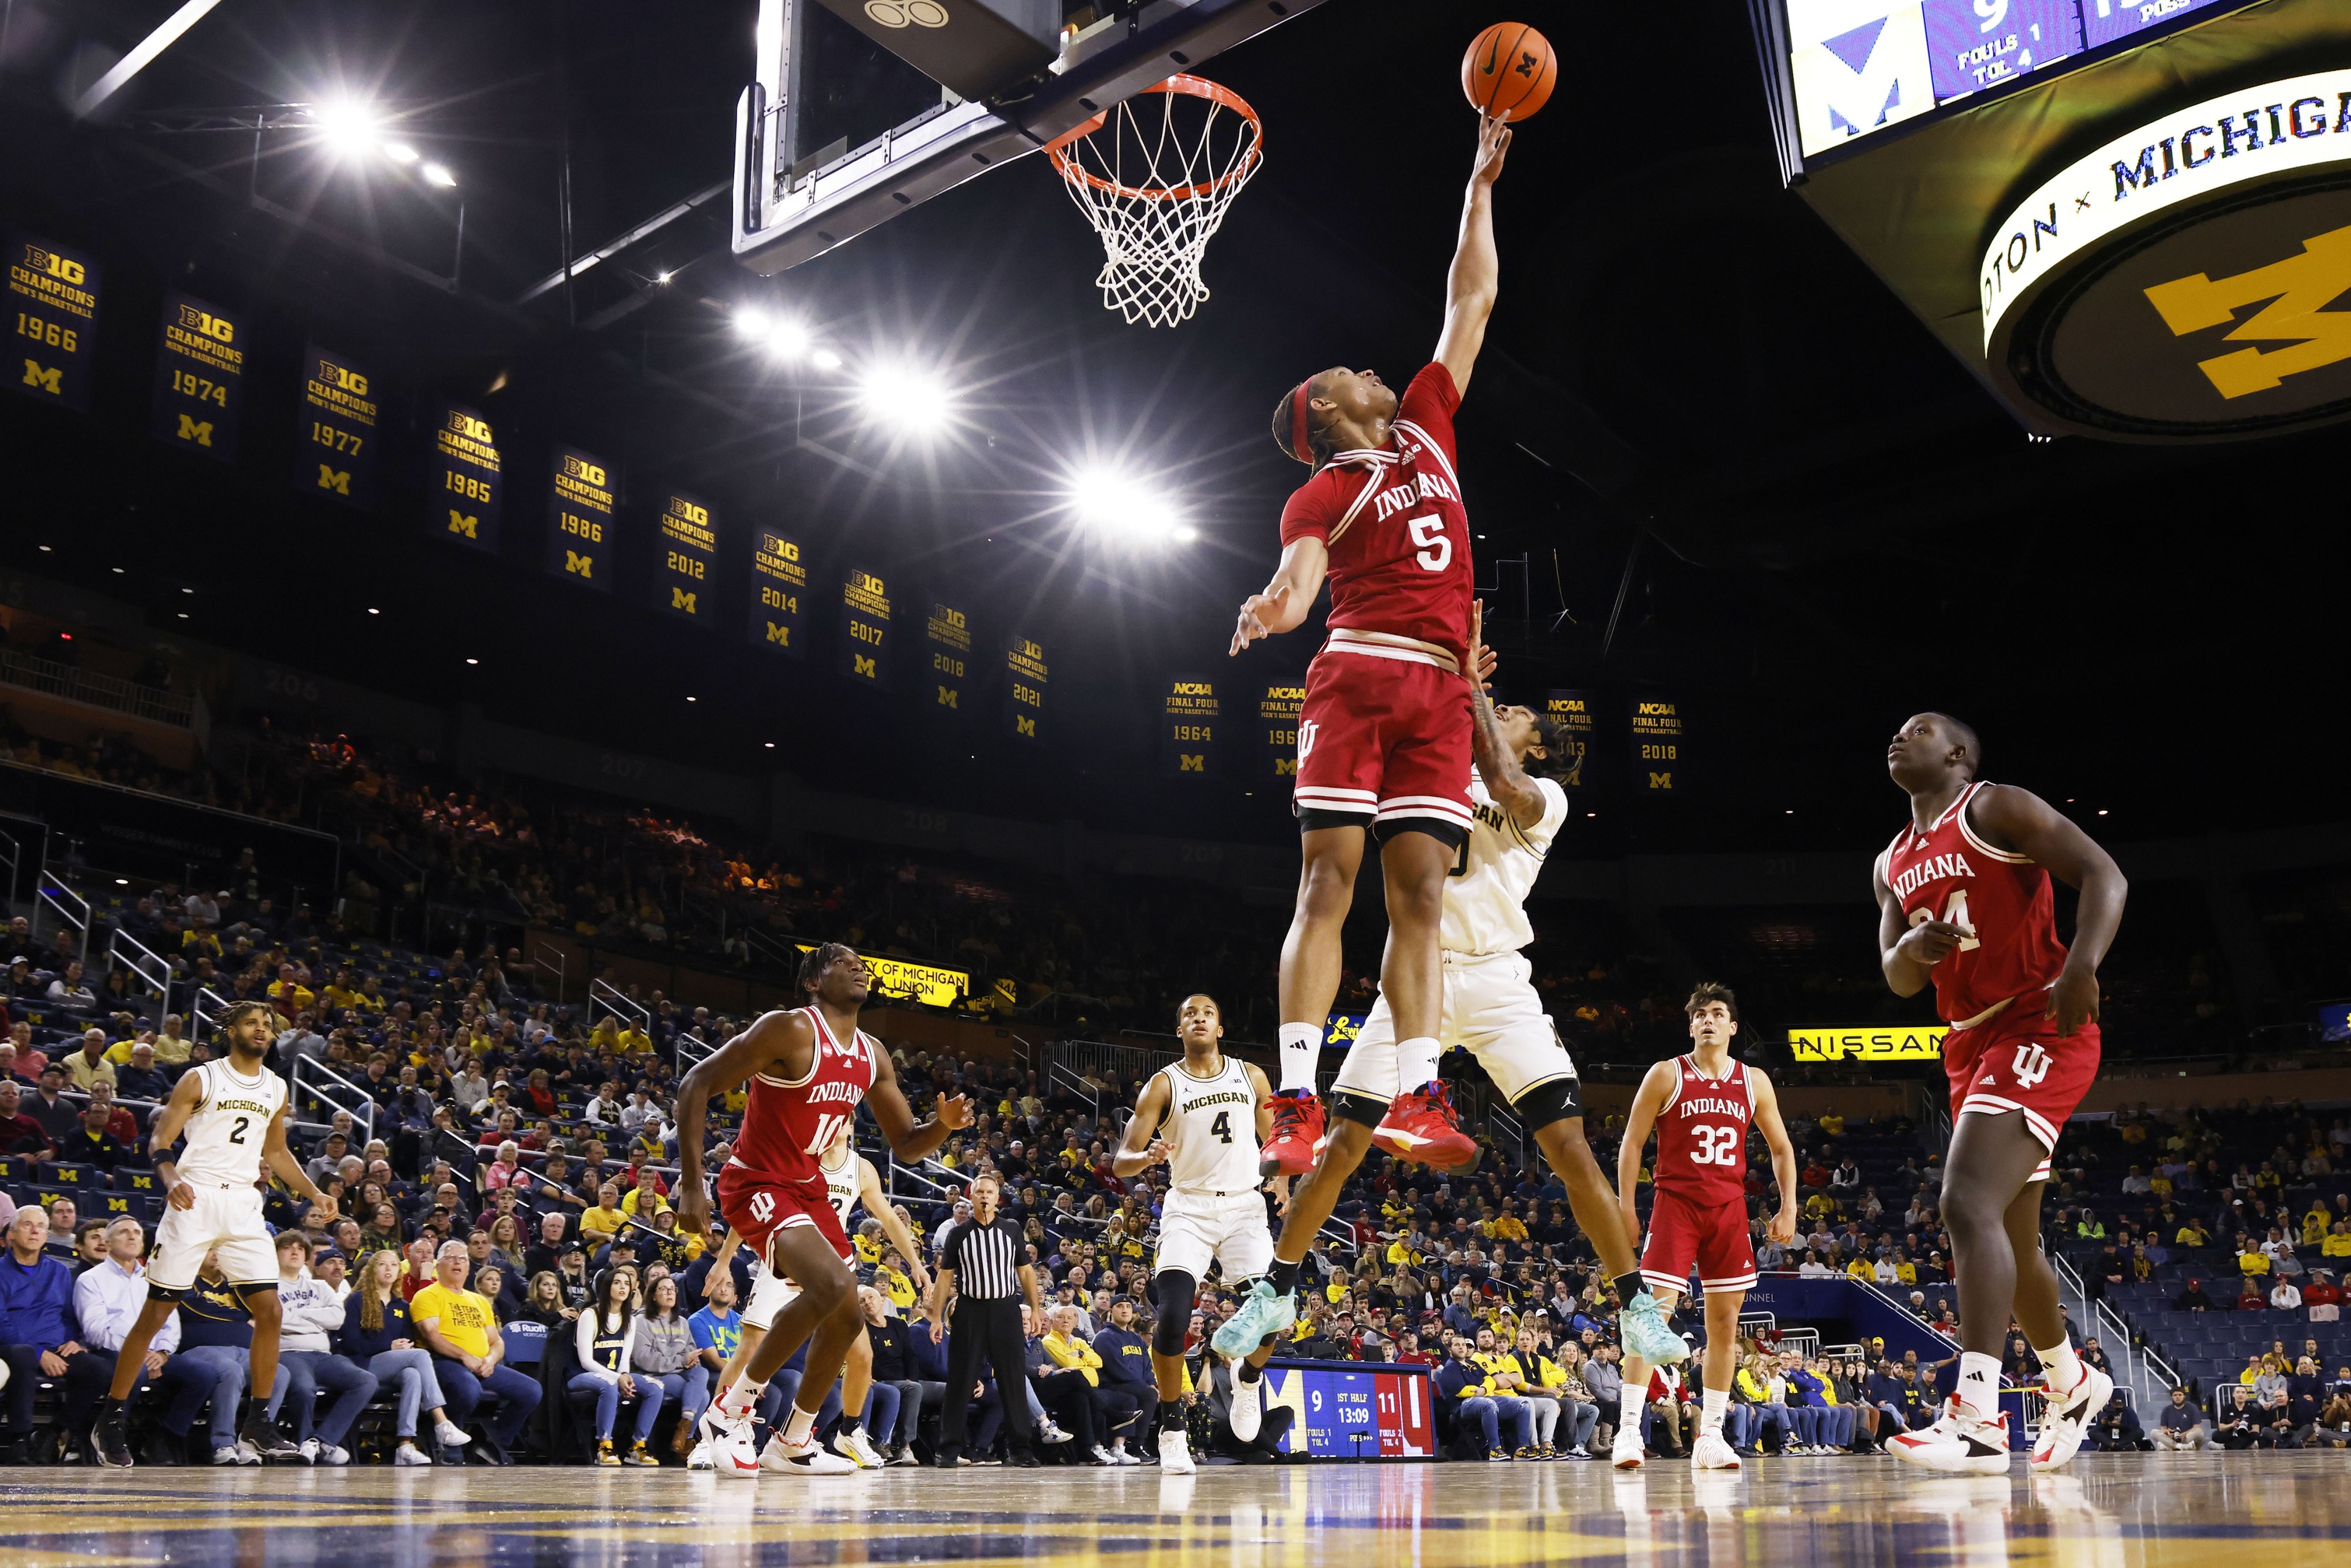 Indiana Hoosiers forward Malik Reneau (5) blocks a shot in the first half against the Michigan Wolverines at Crisler Center.